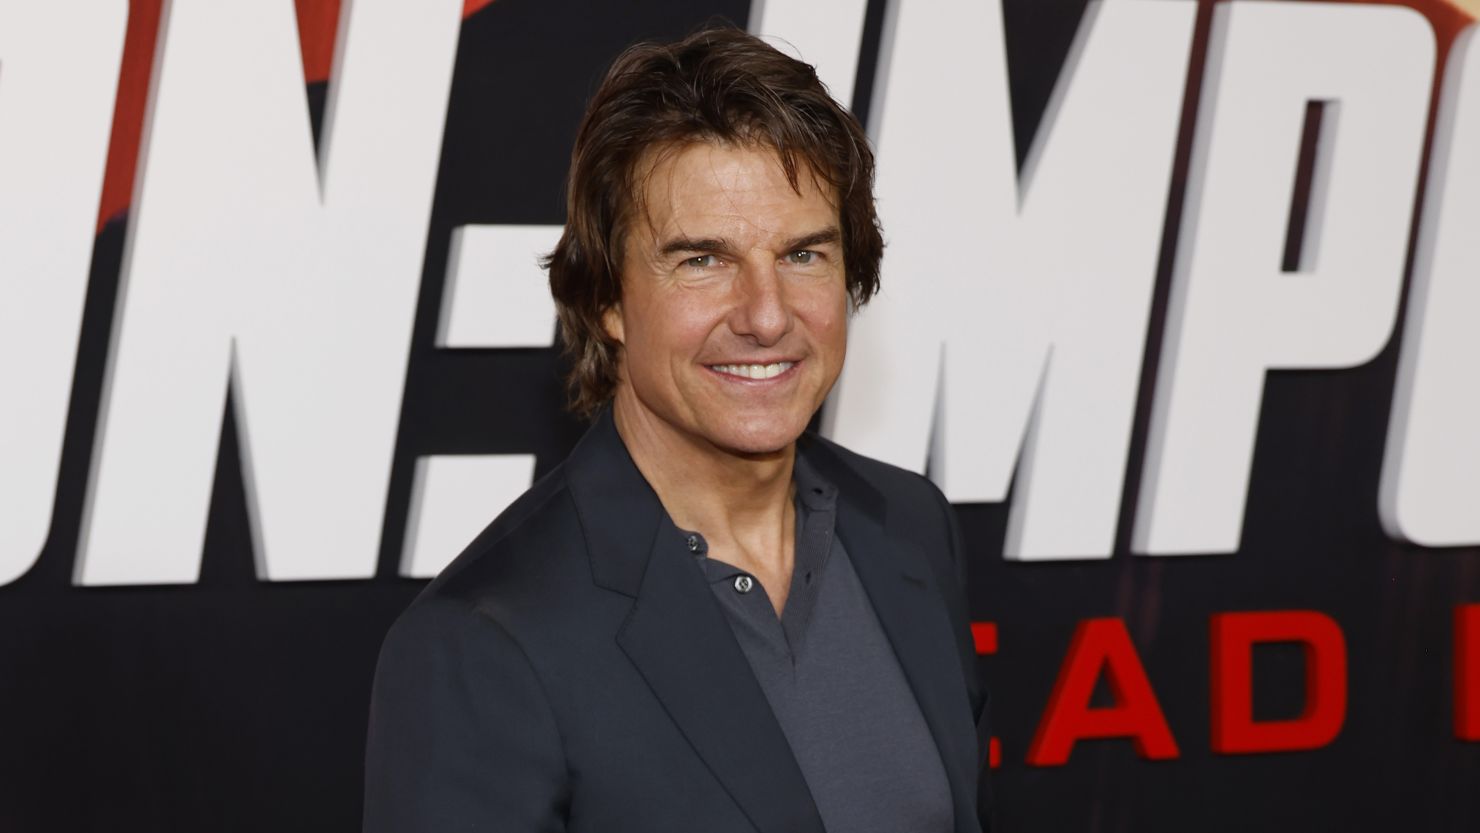 NEW YORK, NEW YORK - JULY 10: Tom Cruise attends the "Mission: Impossible - Dead Reckoning Part One" premiere at Rose Theater, Jazz at Lincoln Center on July 10, 2023 in New York City. (Photo by Mike Coppola/WireImage)